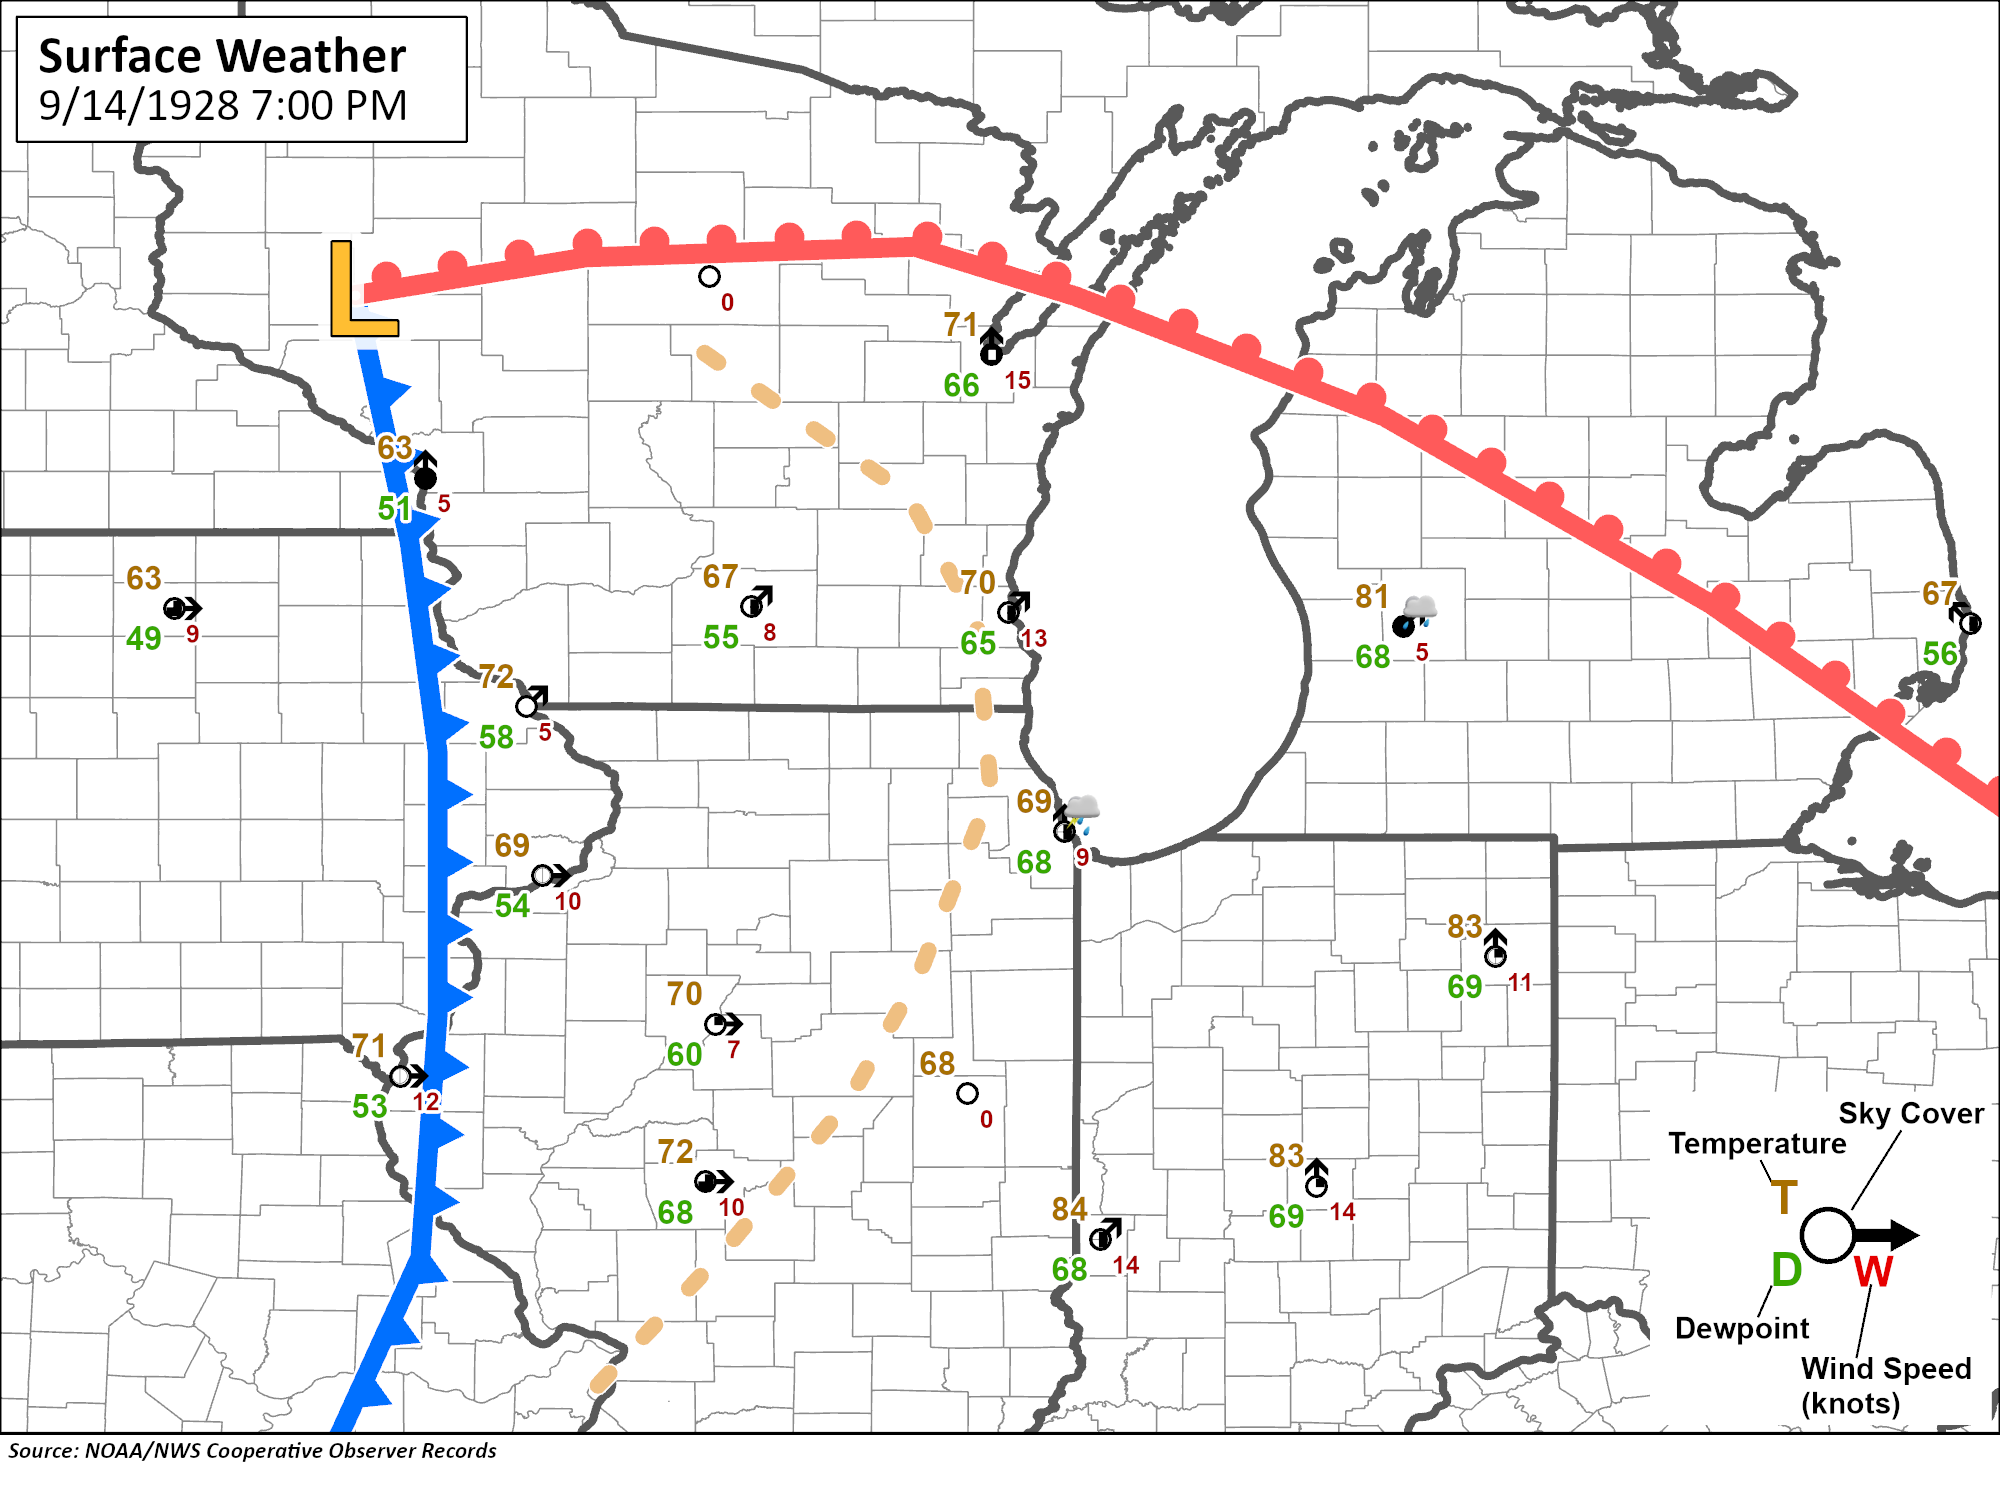 Map showing surface weather features on September 14, 1928 in the Midwest United States. A low pressure area is located in western Wisconsin near the Mississippi River. A warm front is depicted east through Wisconsin into central Michigan and a cold front depicted south along the Mississippi River into eastern Missouri. A dry line or outflow boundary is depicted moving into northeastern Illinois near Lake Michigan.